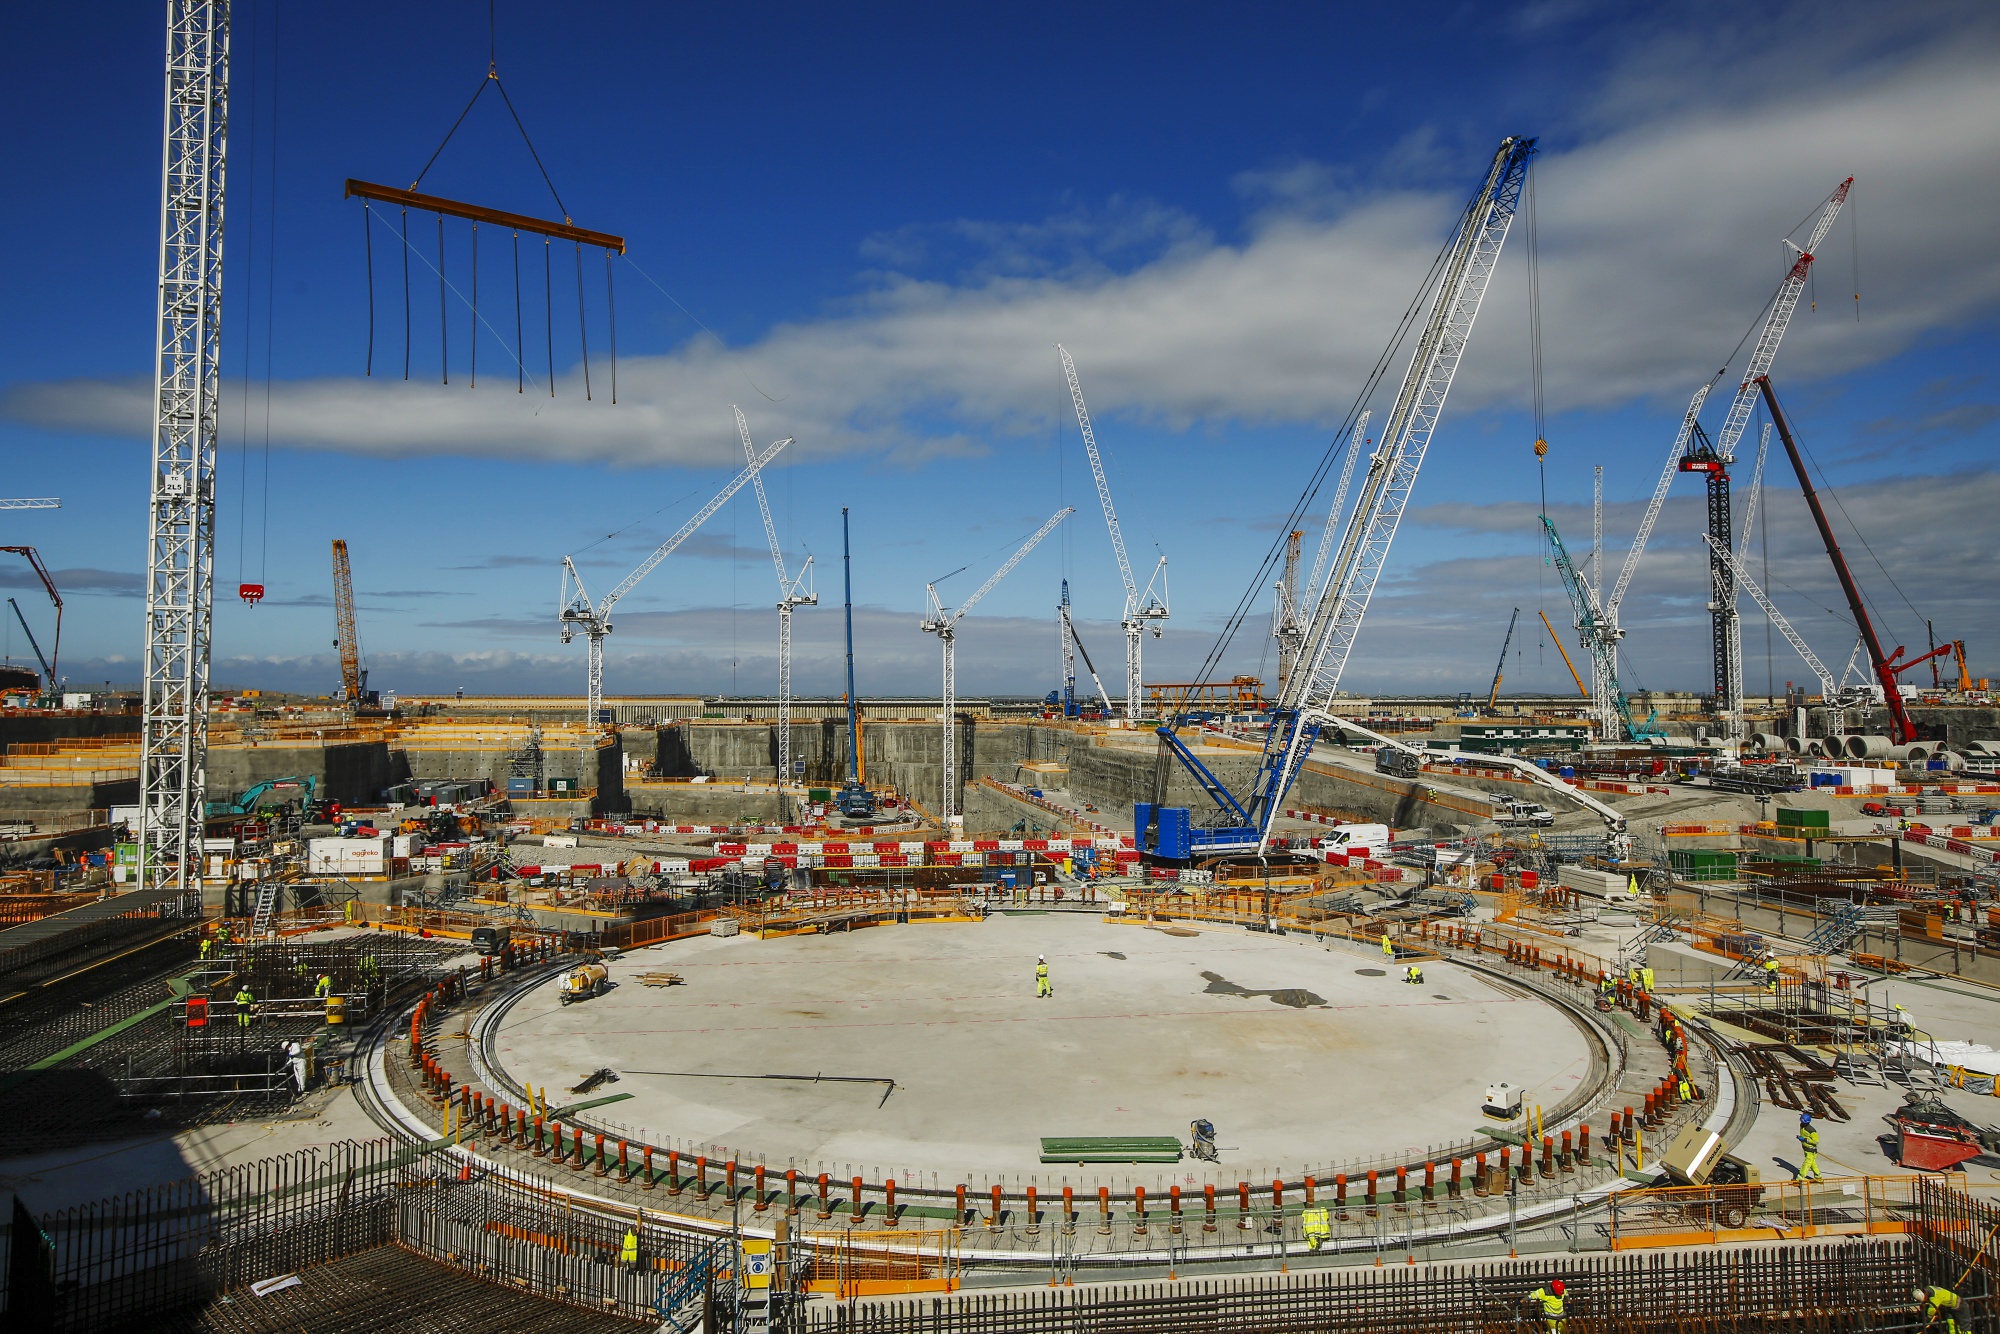 While its other project, Hinkley Point C, is taking&nbsp;longer to build and costing more&nbsp;than planned, Sizewell C is a copy which should make it 20% cheaper to build, according to EDF.